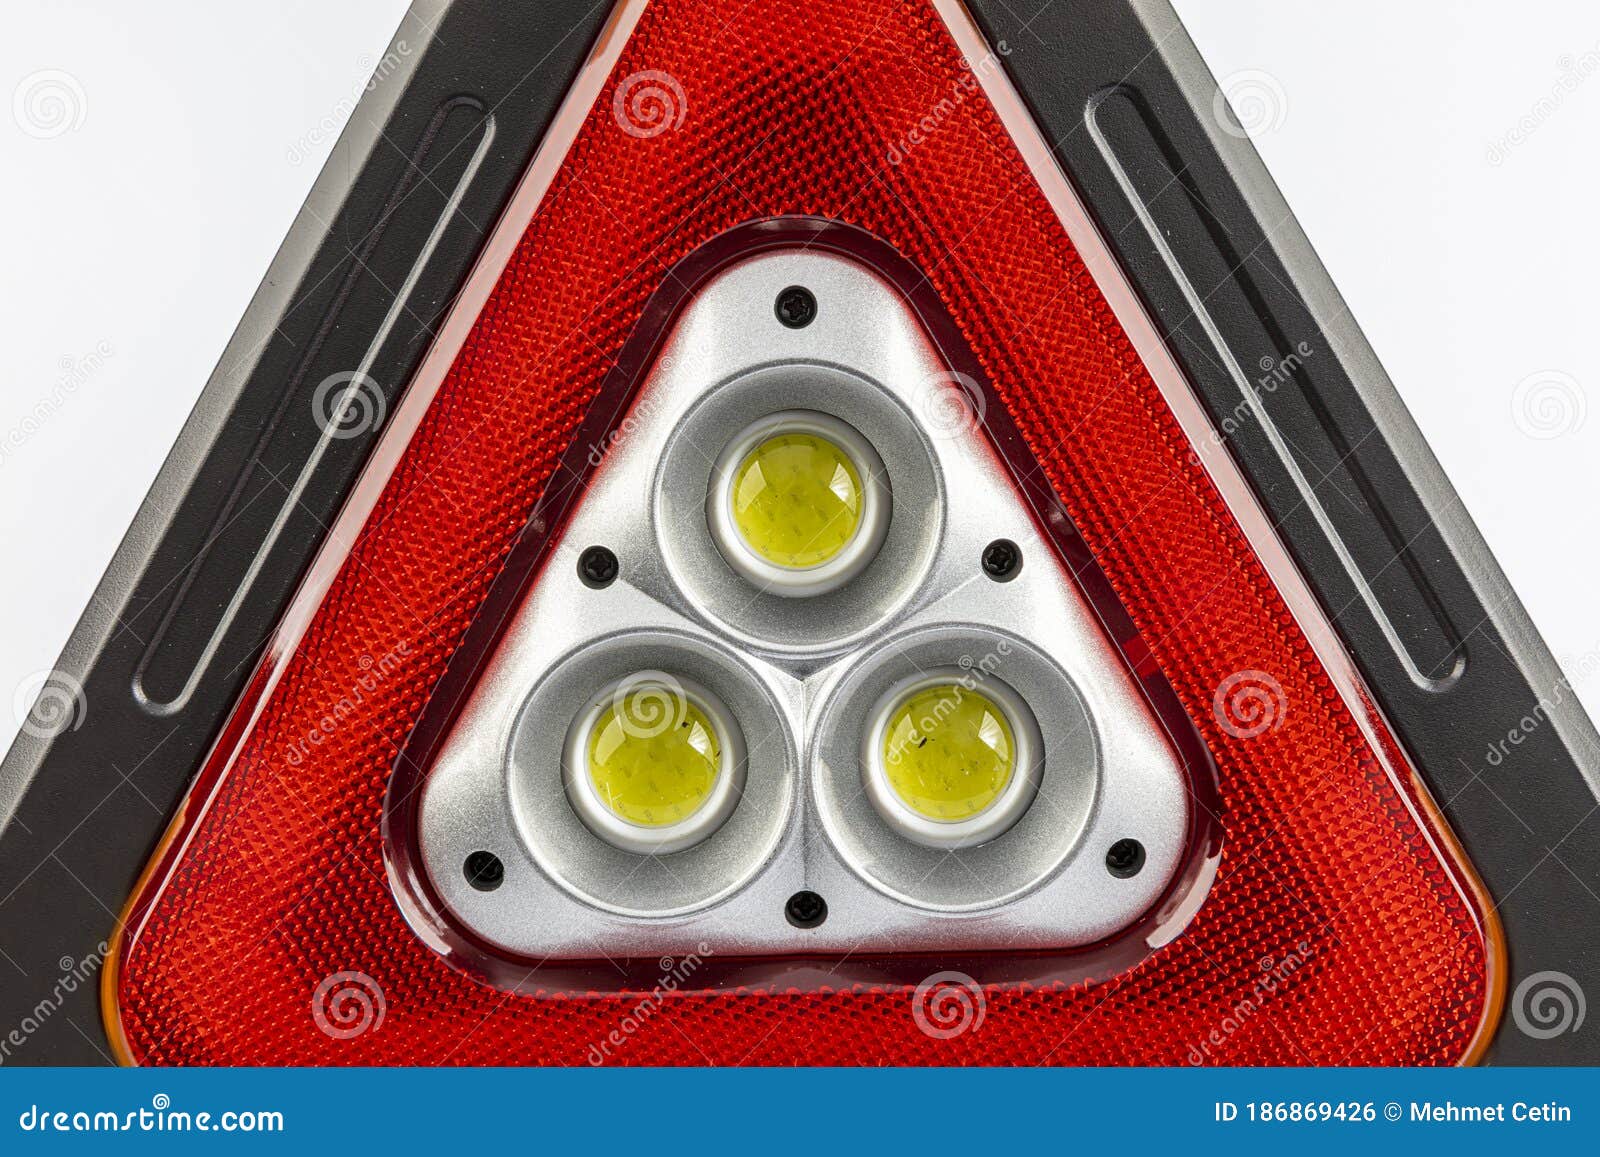 Culpable Extracción Cava Multifunctional Cob Working Lamp. Portable Flood Lamp COB Work Light  Triangle Warning Light SOS Searchlight Emergency Warning Stock Photo -  Image of repair, automotive: 186869426